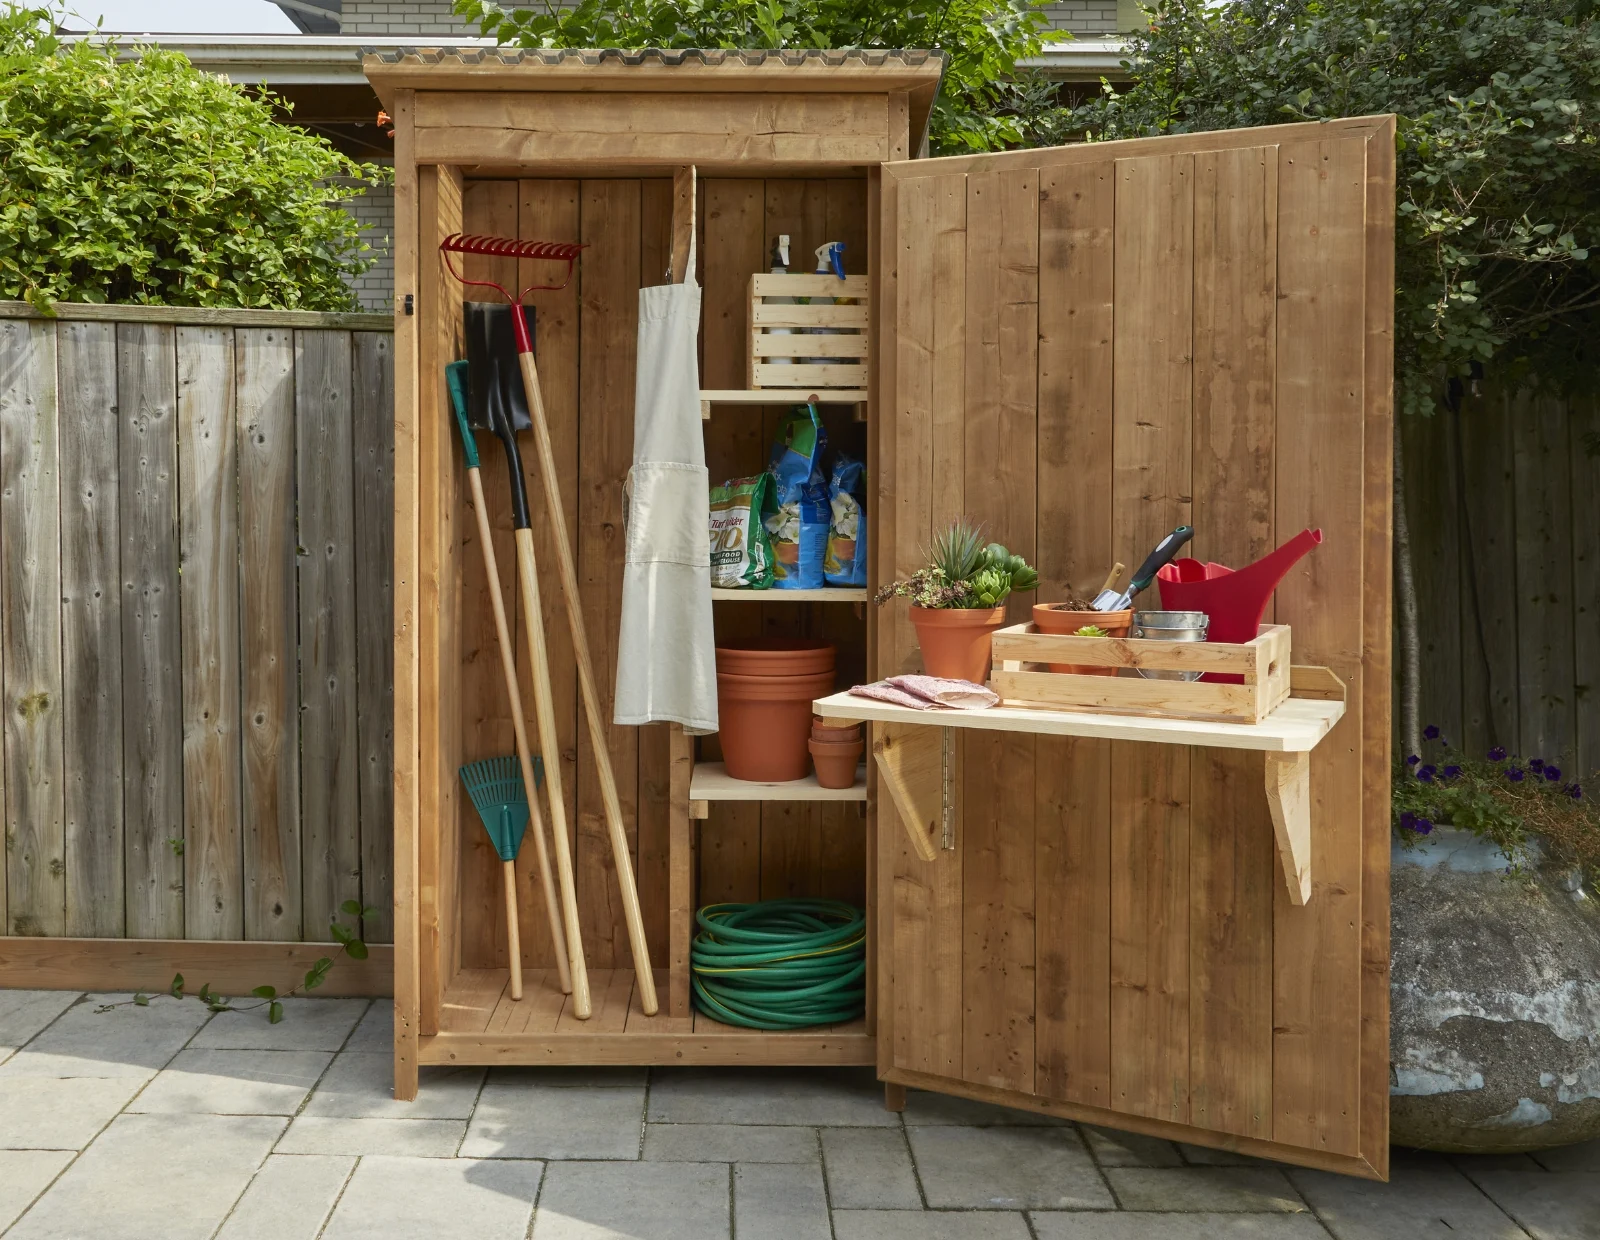 Here’s How to Build a DIY Storage Shed | Home Hardware